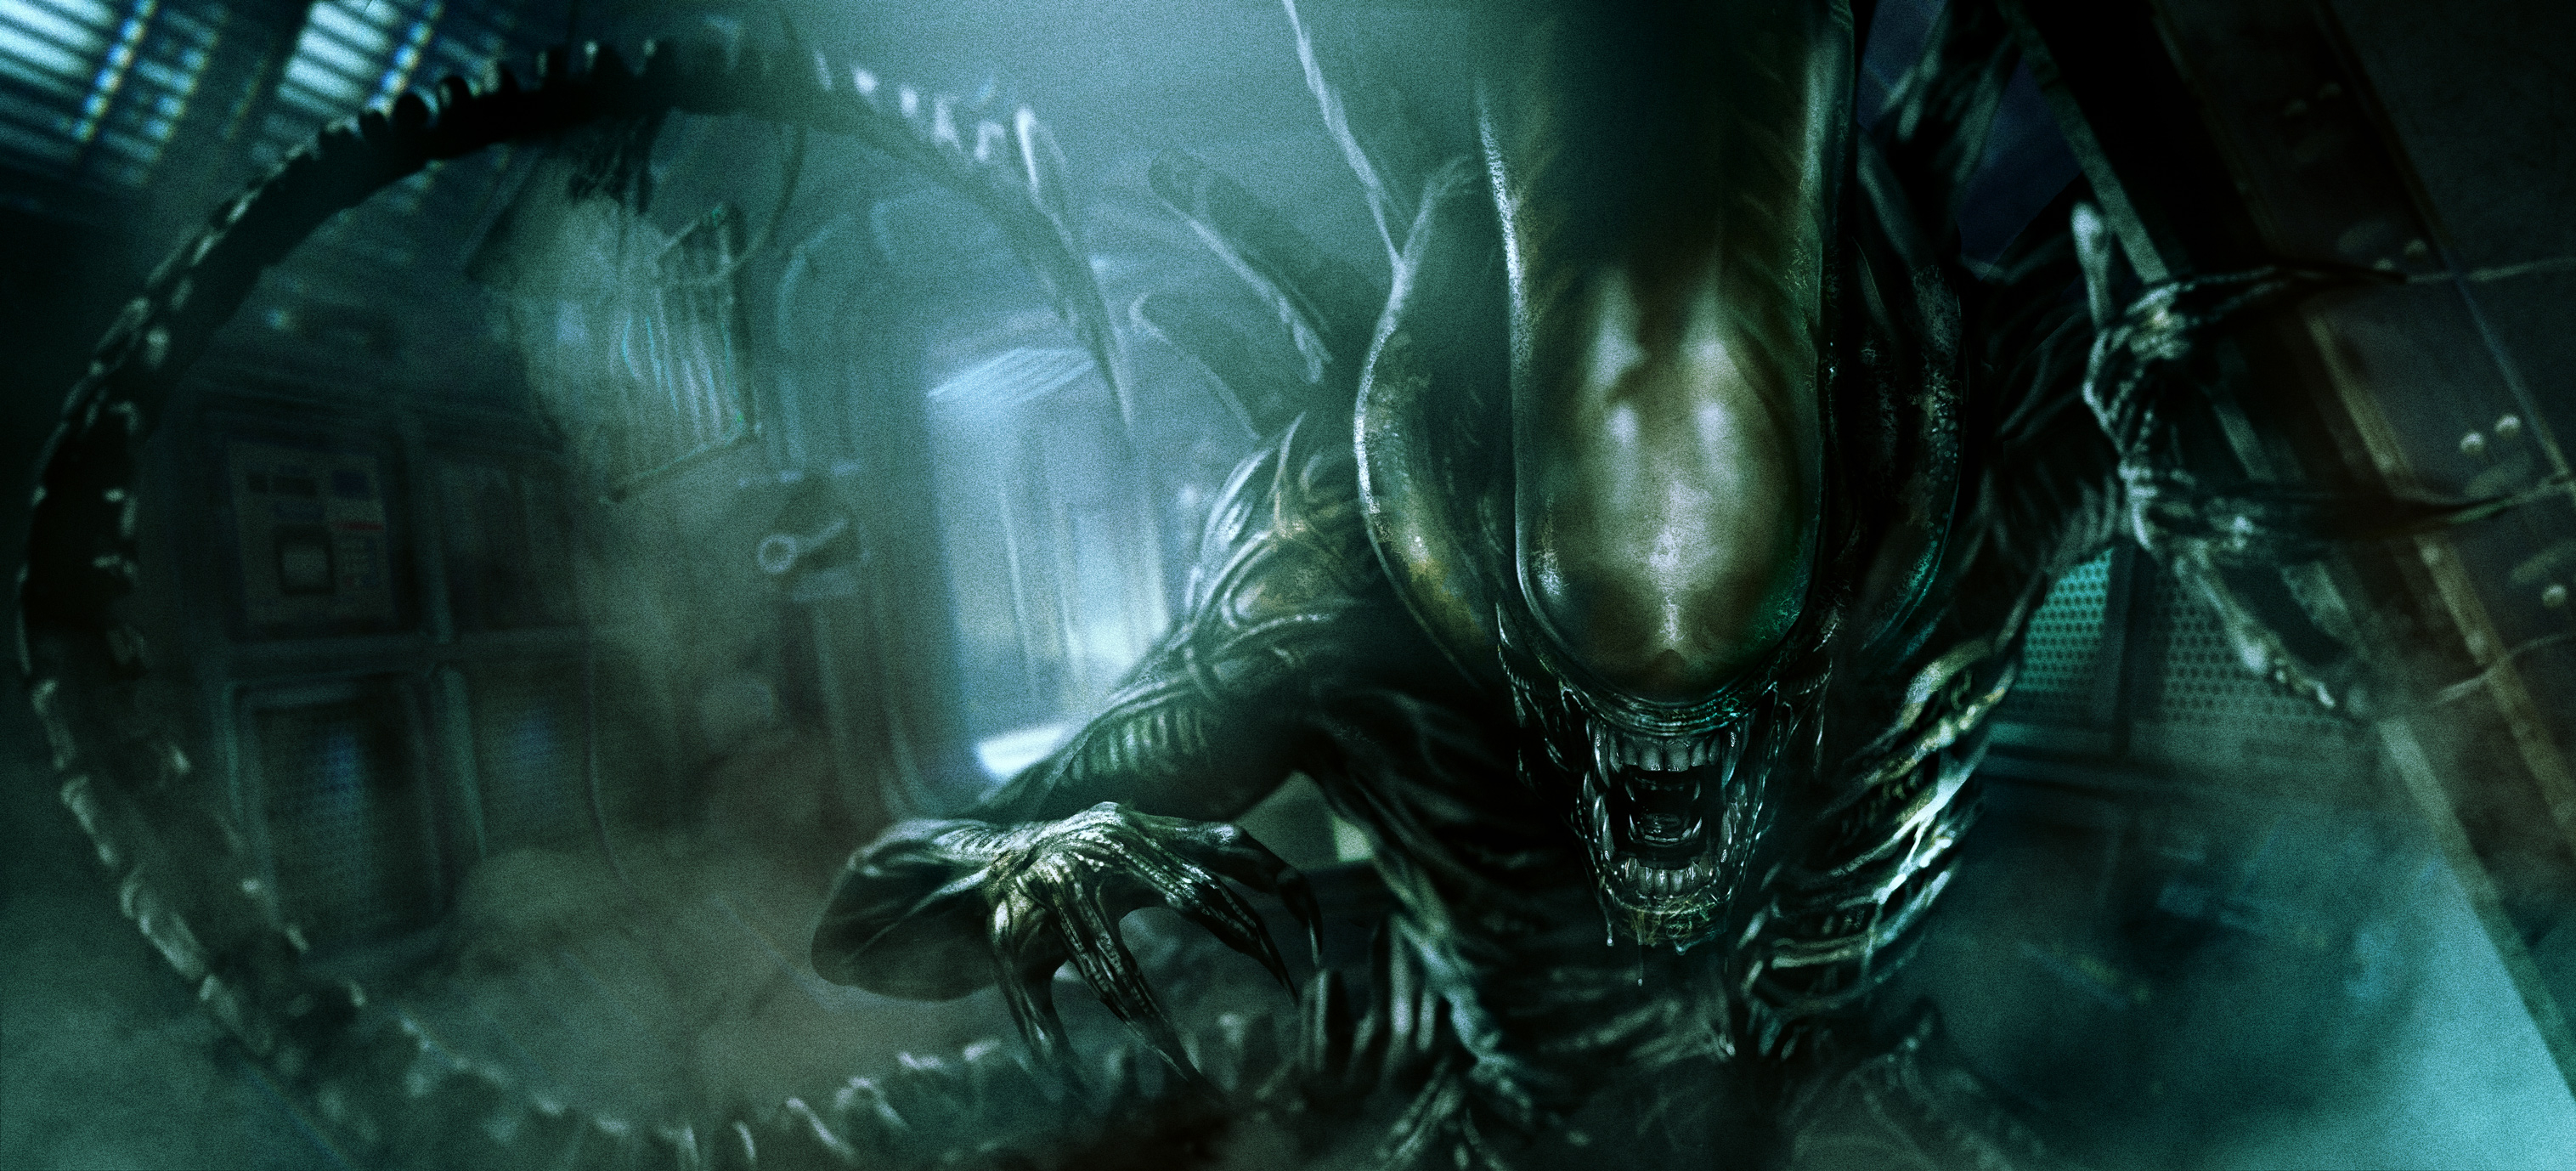 3032x1378 50+ Xenomorph HD Wallpapers and Backgrounds